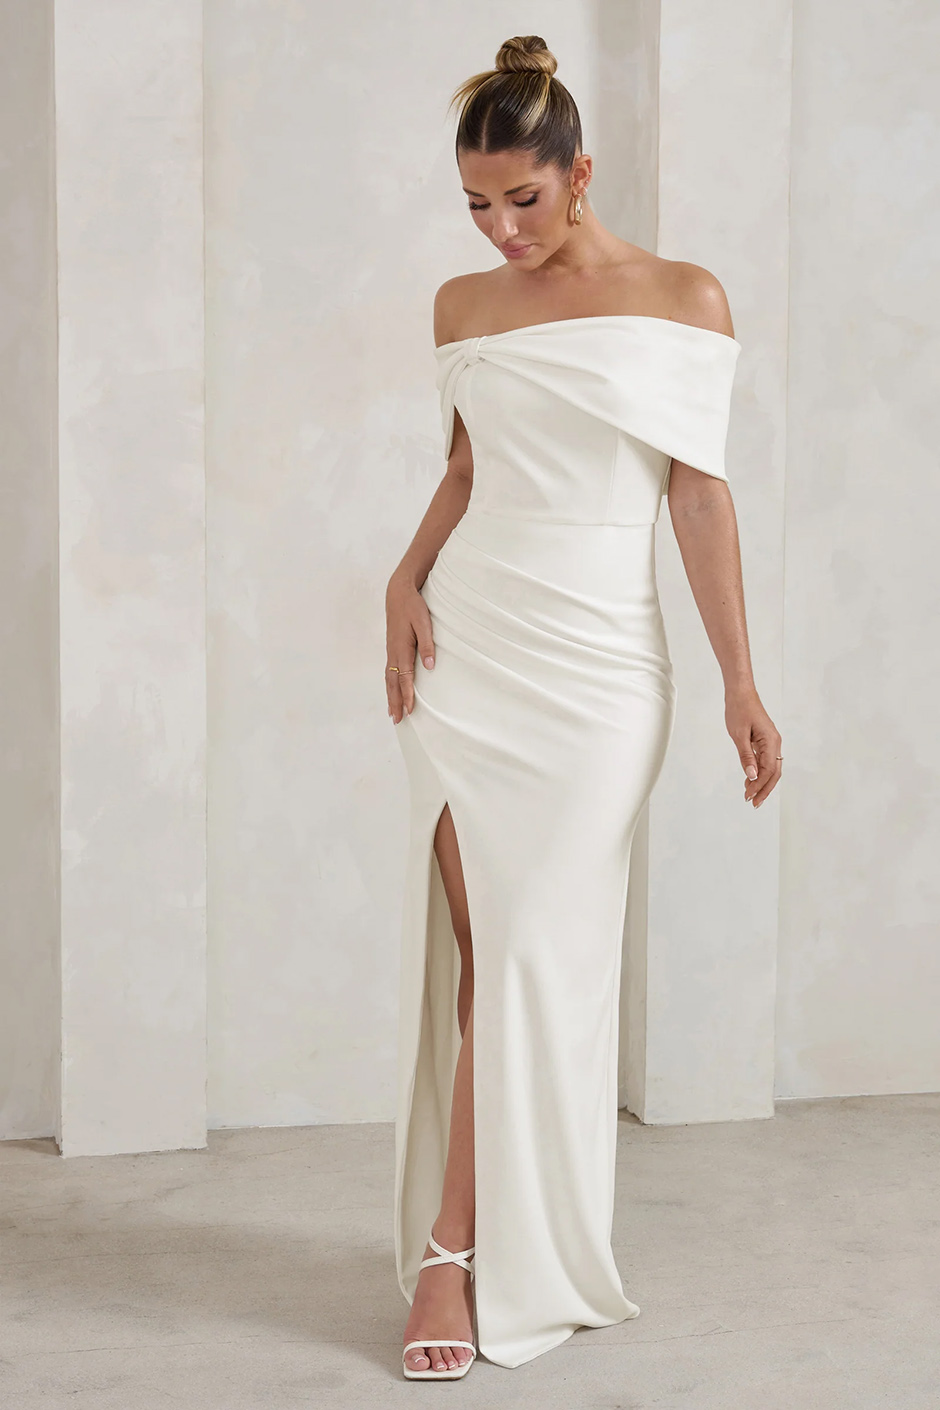 White bridal maxi dress from Club L London with bardot bow neckline and thigh split